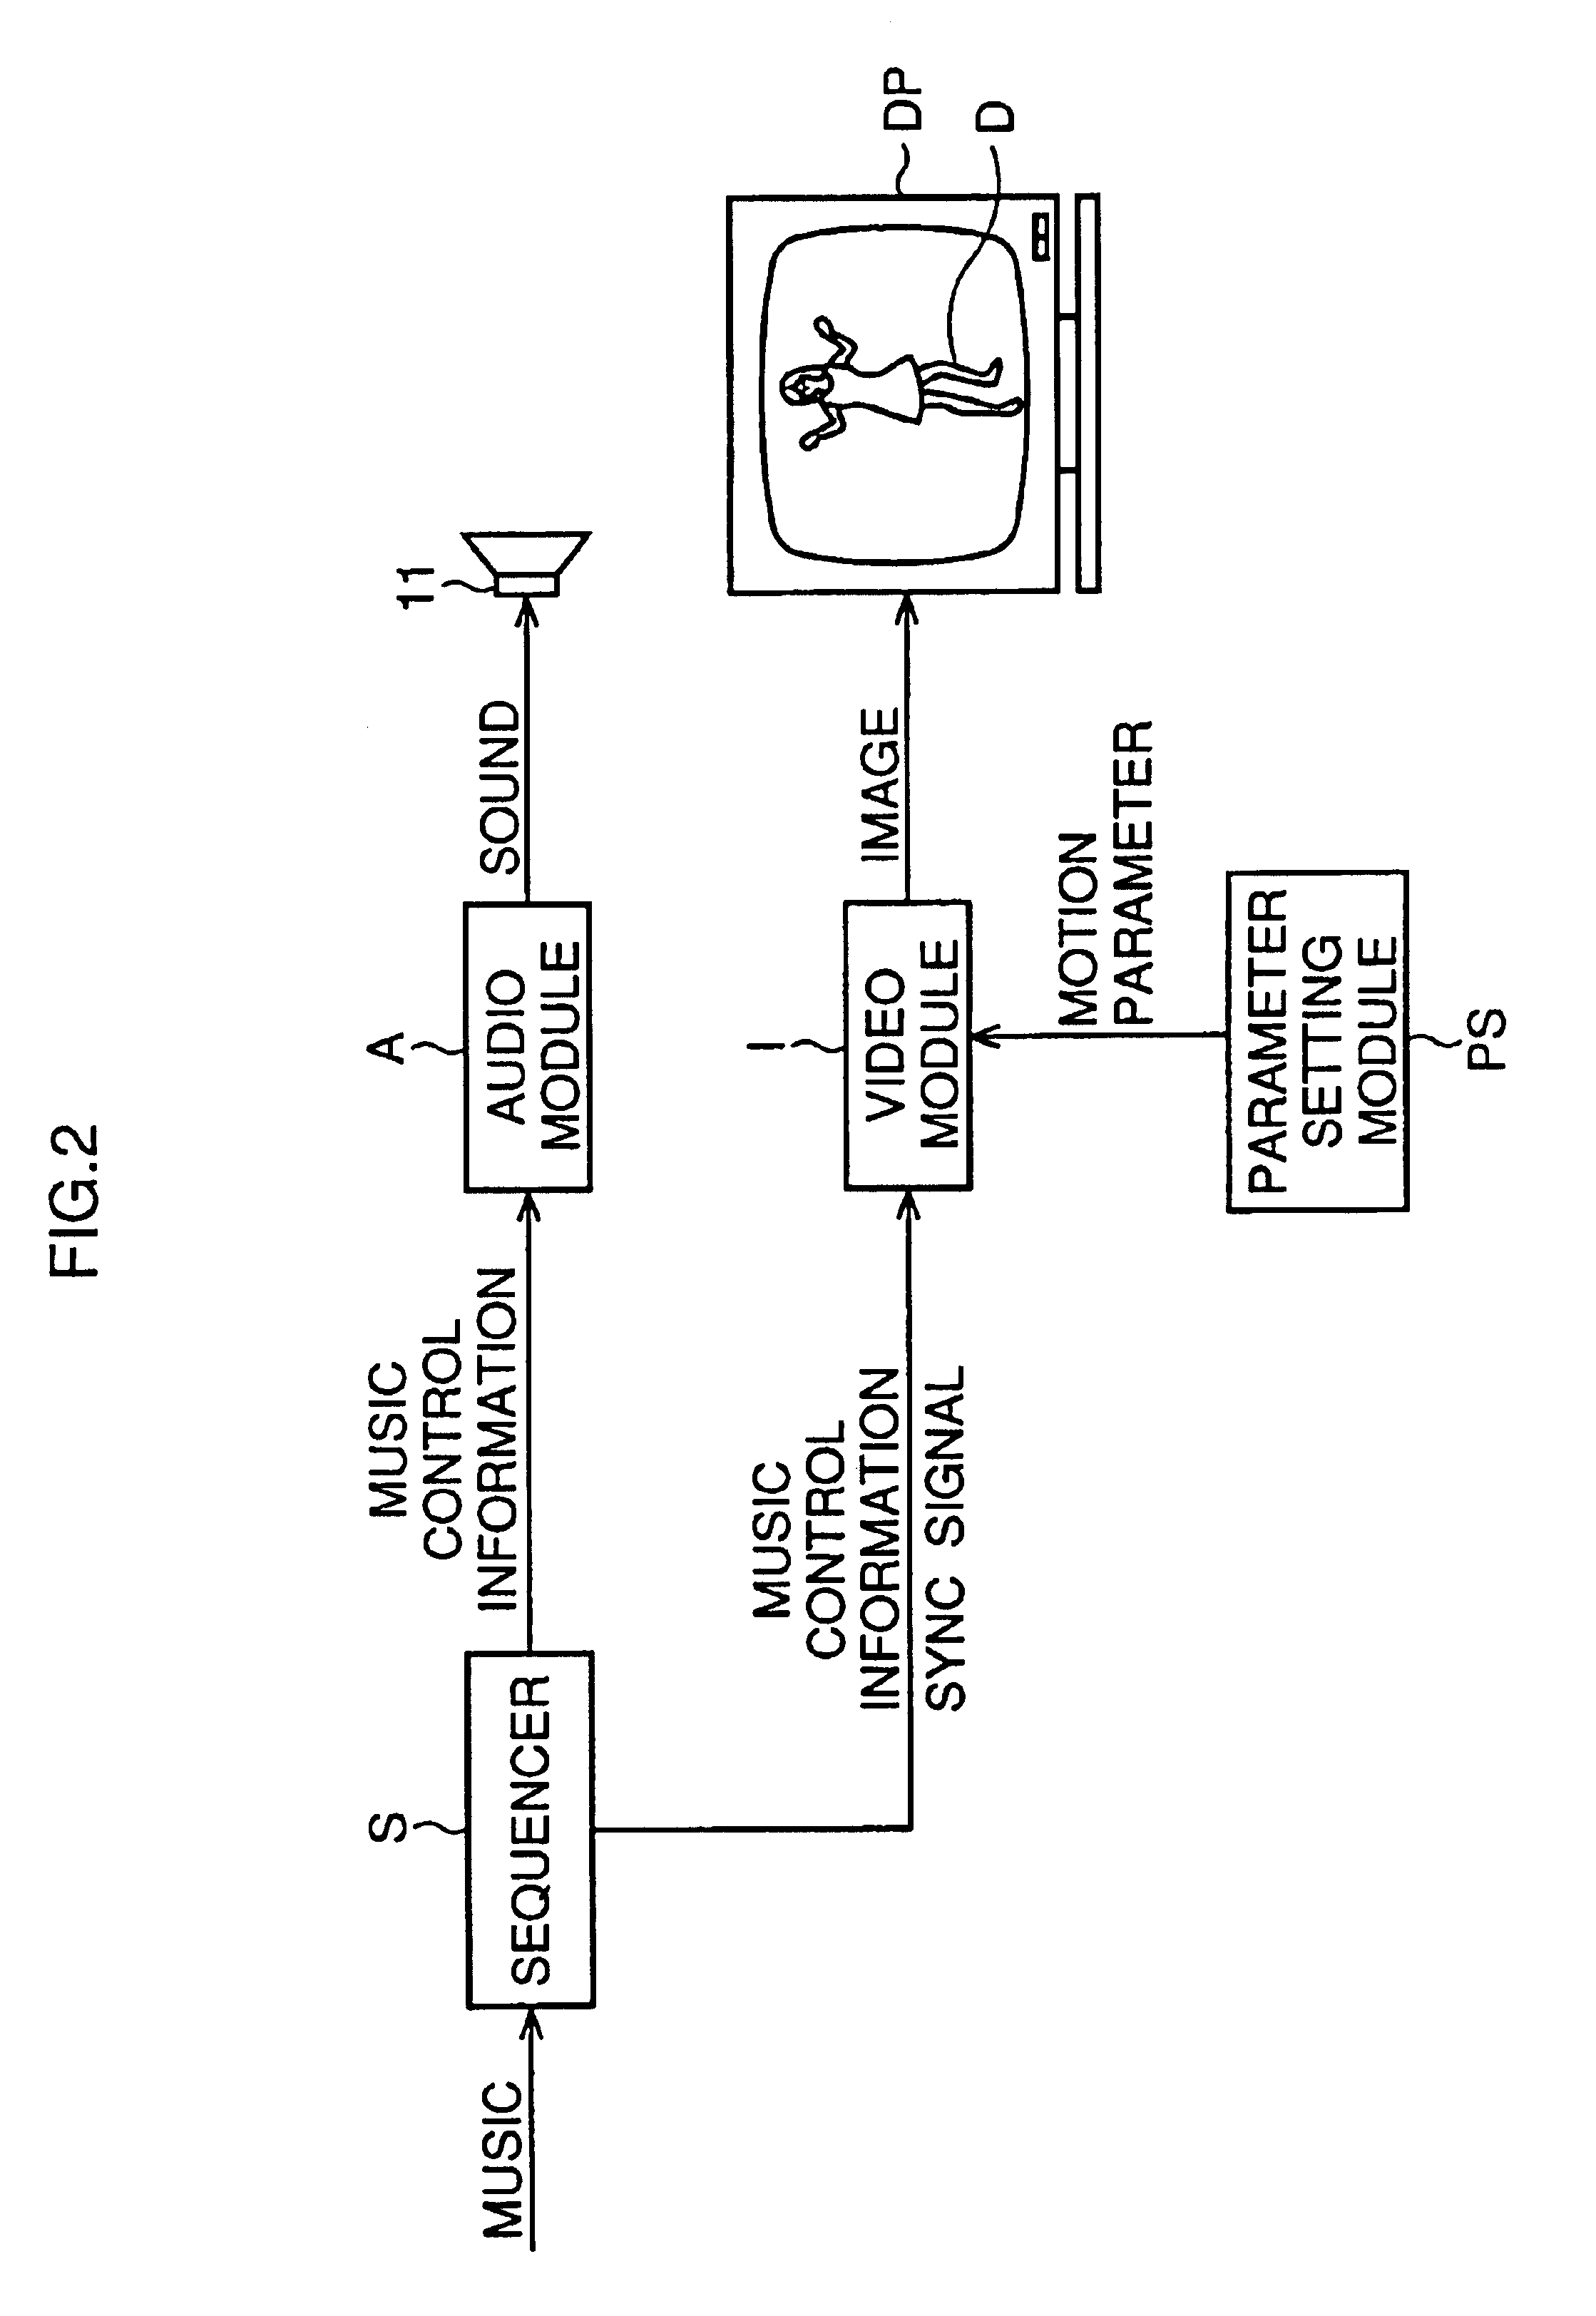 System of generating motion picture responsive to music